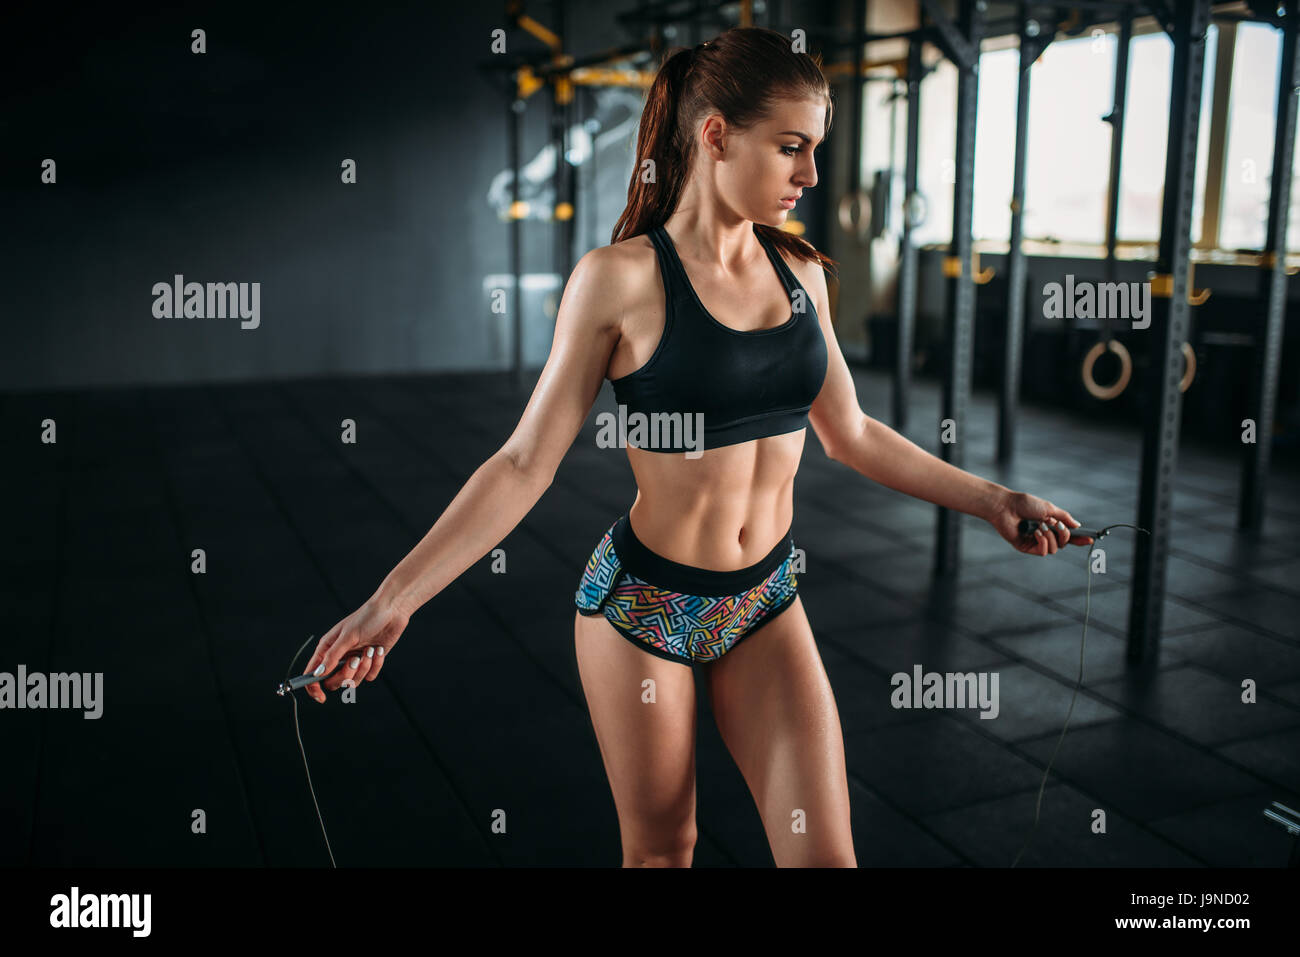 https://c8.alamy.com/comp/J9ND02/female-athlete-exercise-with-a-jump-rope-in-sport-gym-active-woman-J9ND02.jpg